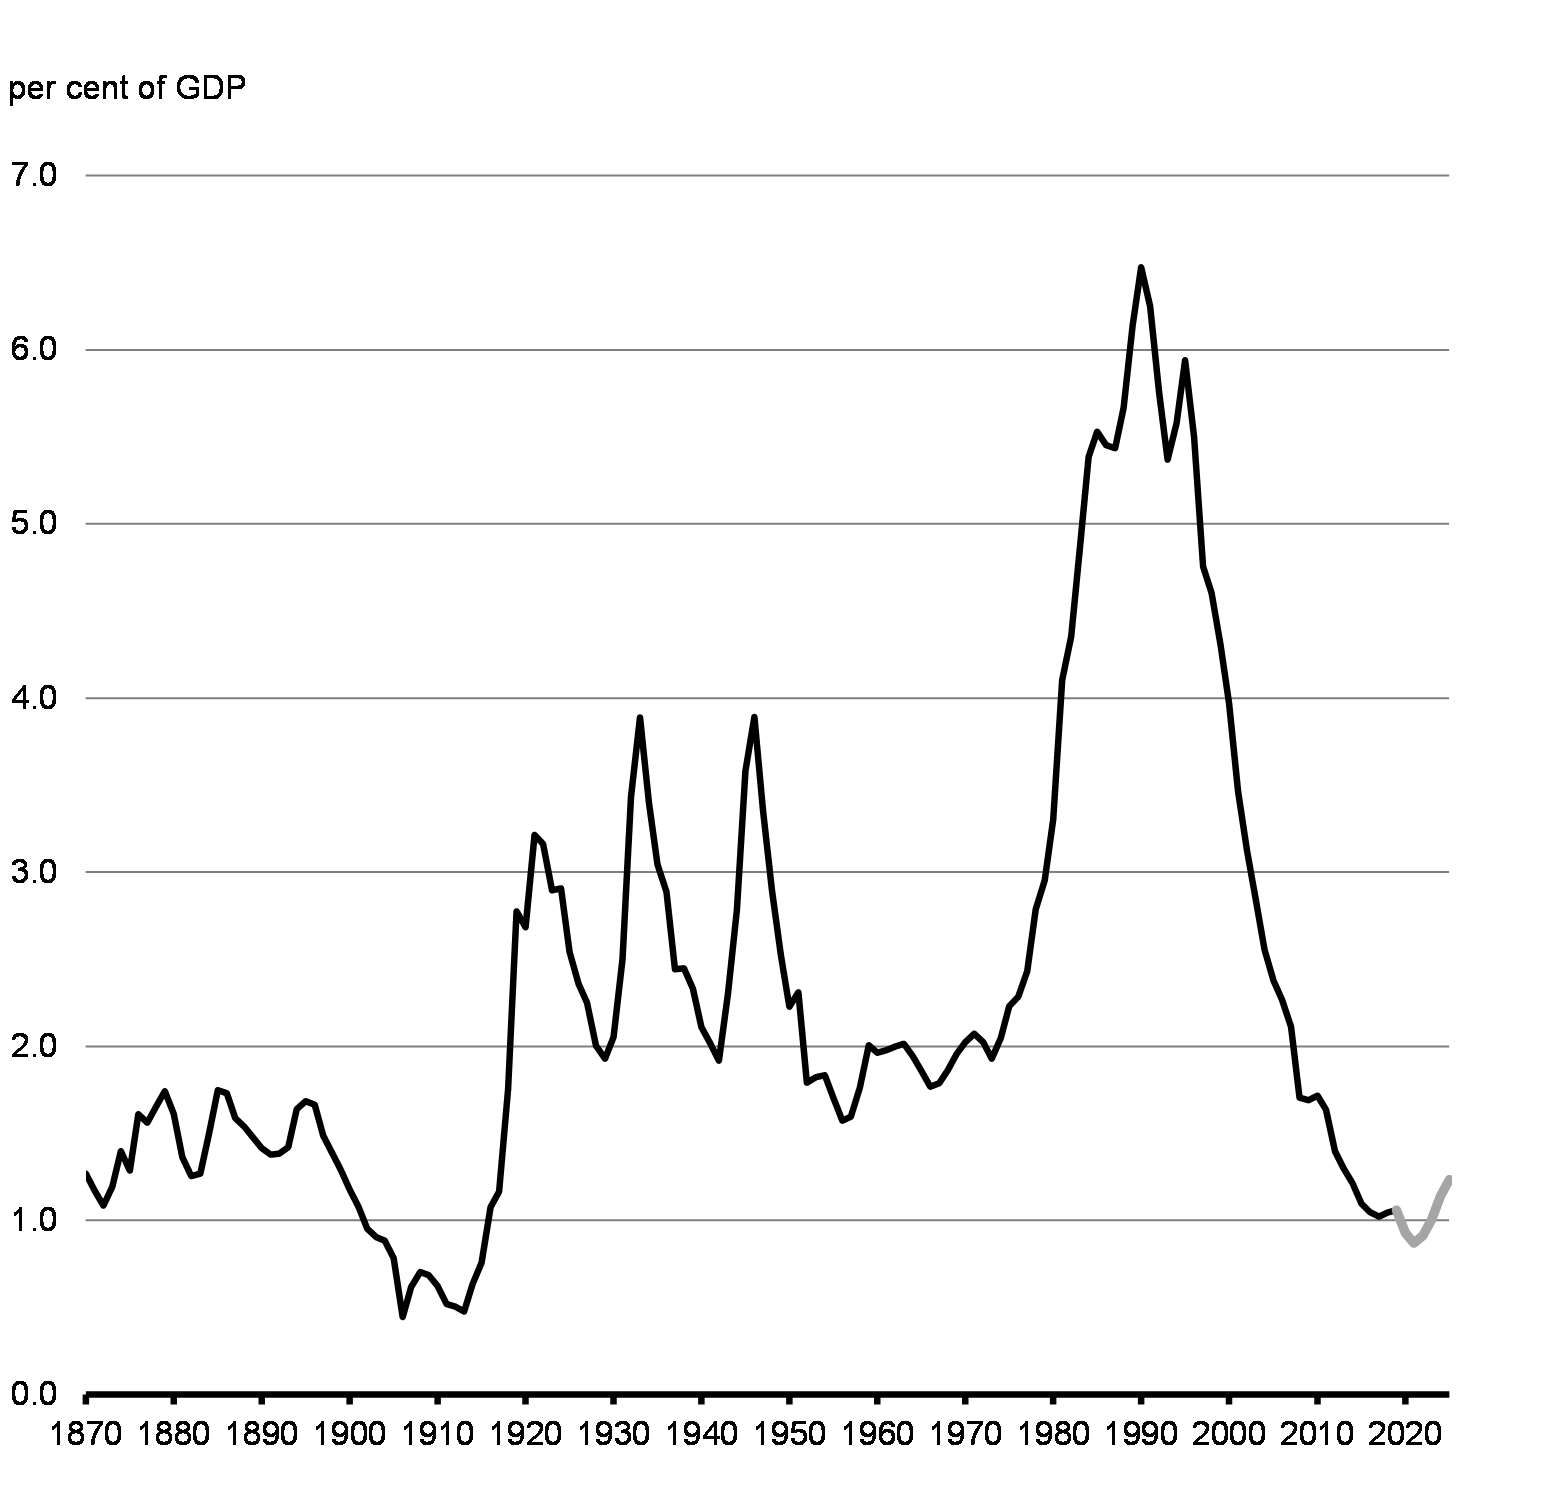 Chart 4.11: Public Debt Charges, 1870-71 to 2025-26